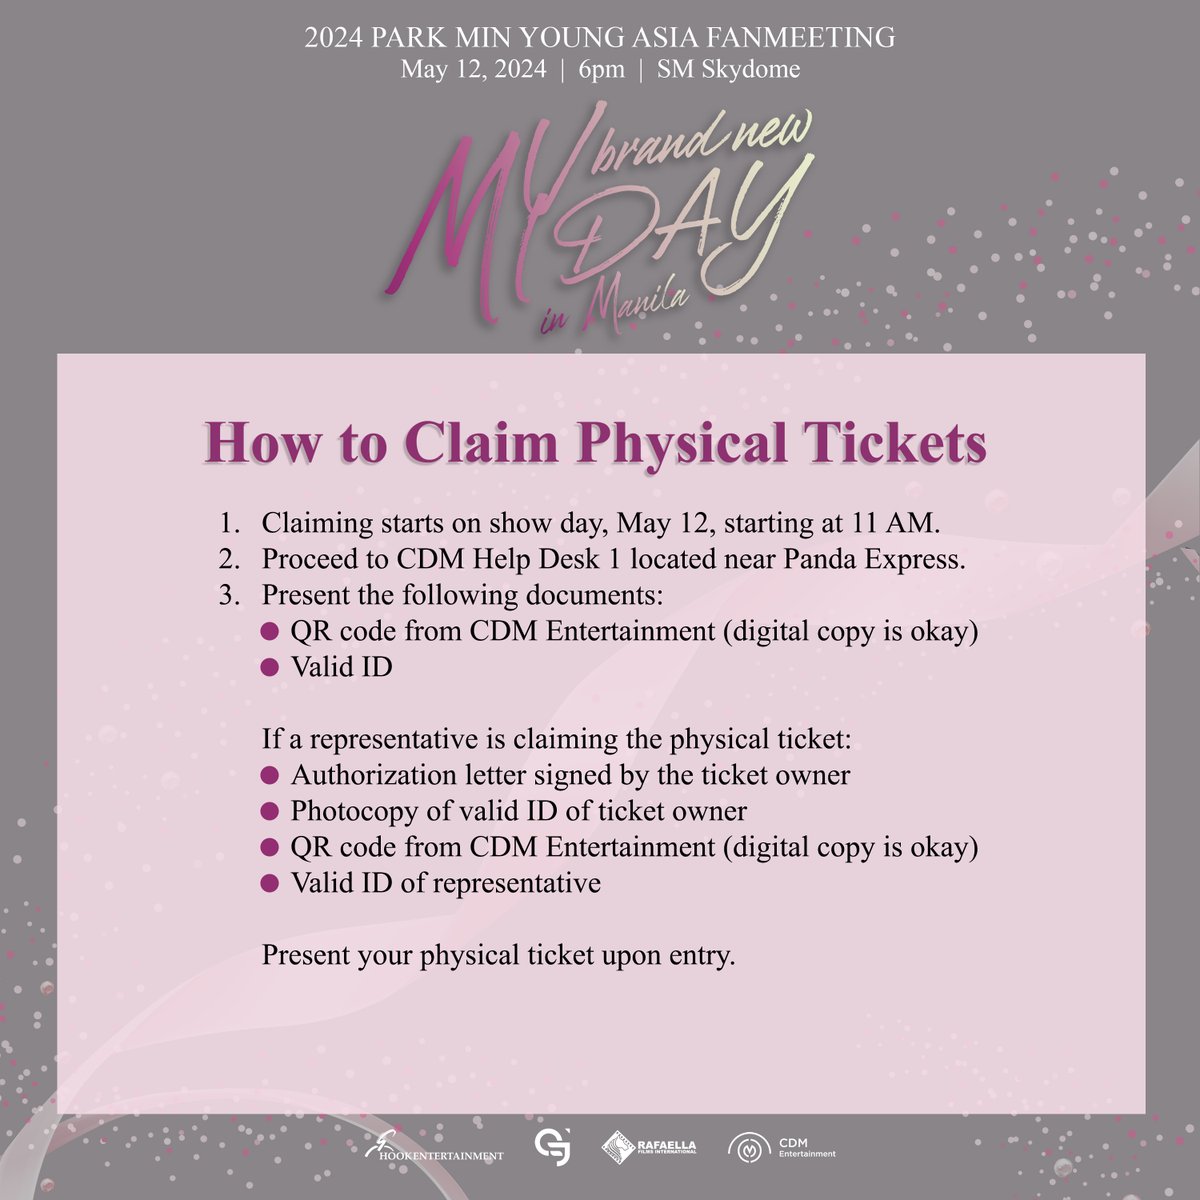 Please see below for guidelines on How to Claim Physical Tickets. #MyBrandNewDayMNL #ParkMinYoungInManila #ParkMinYoung